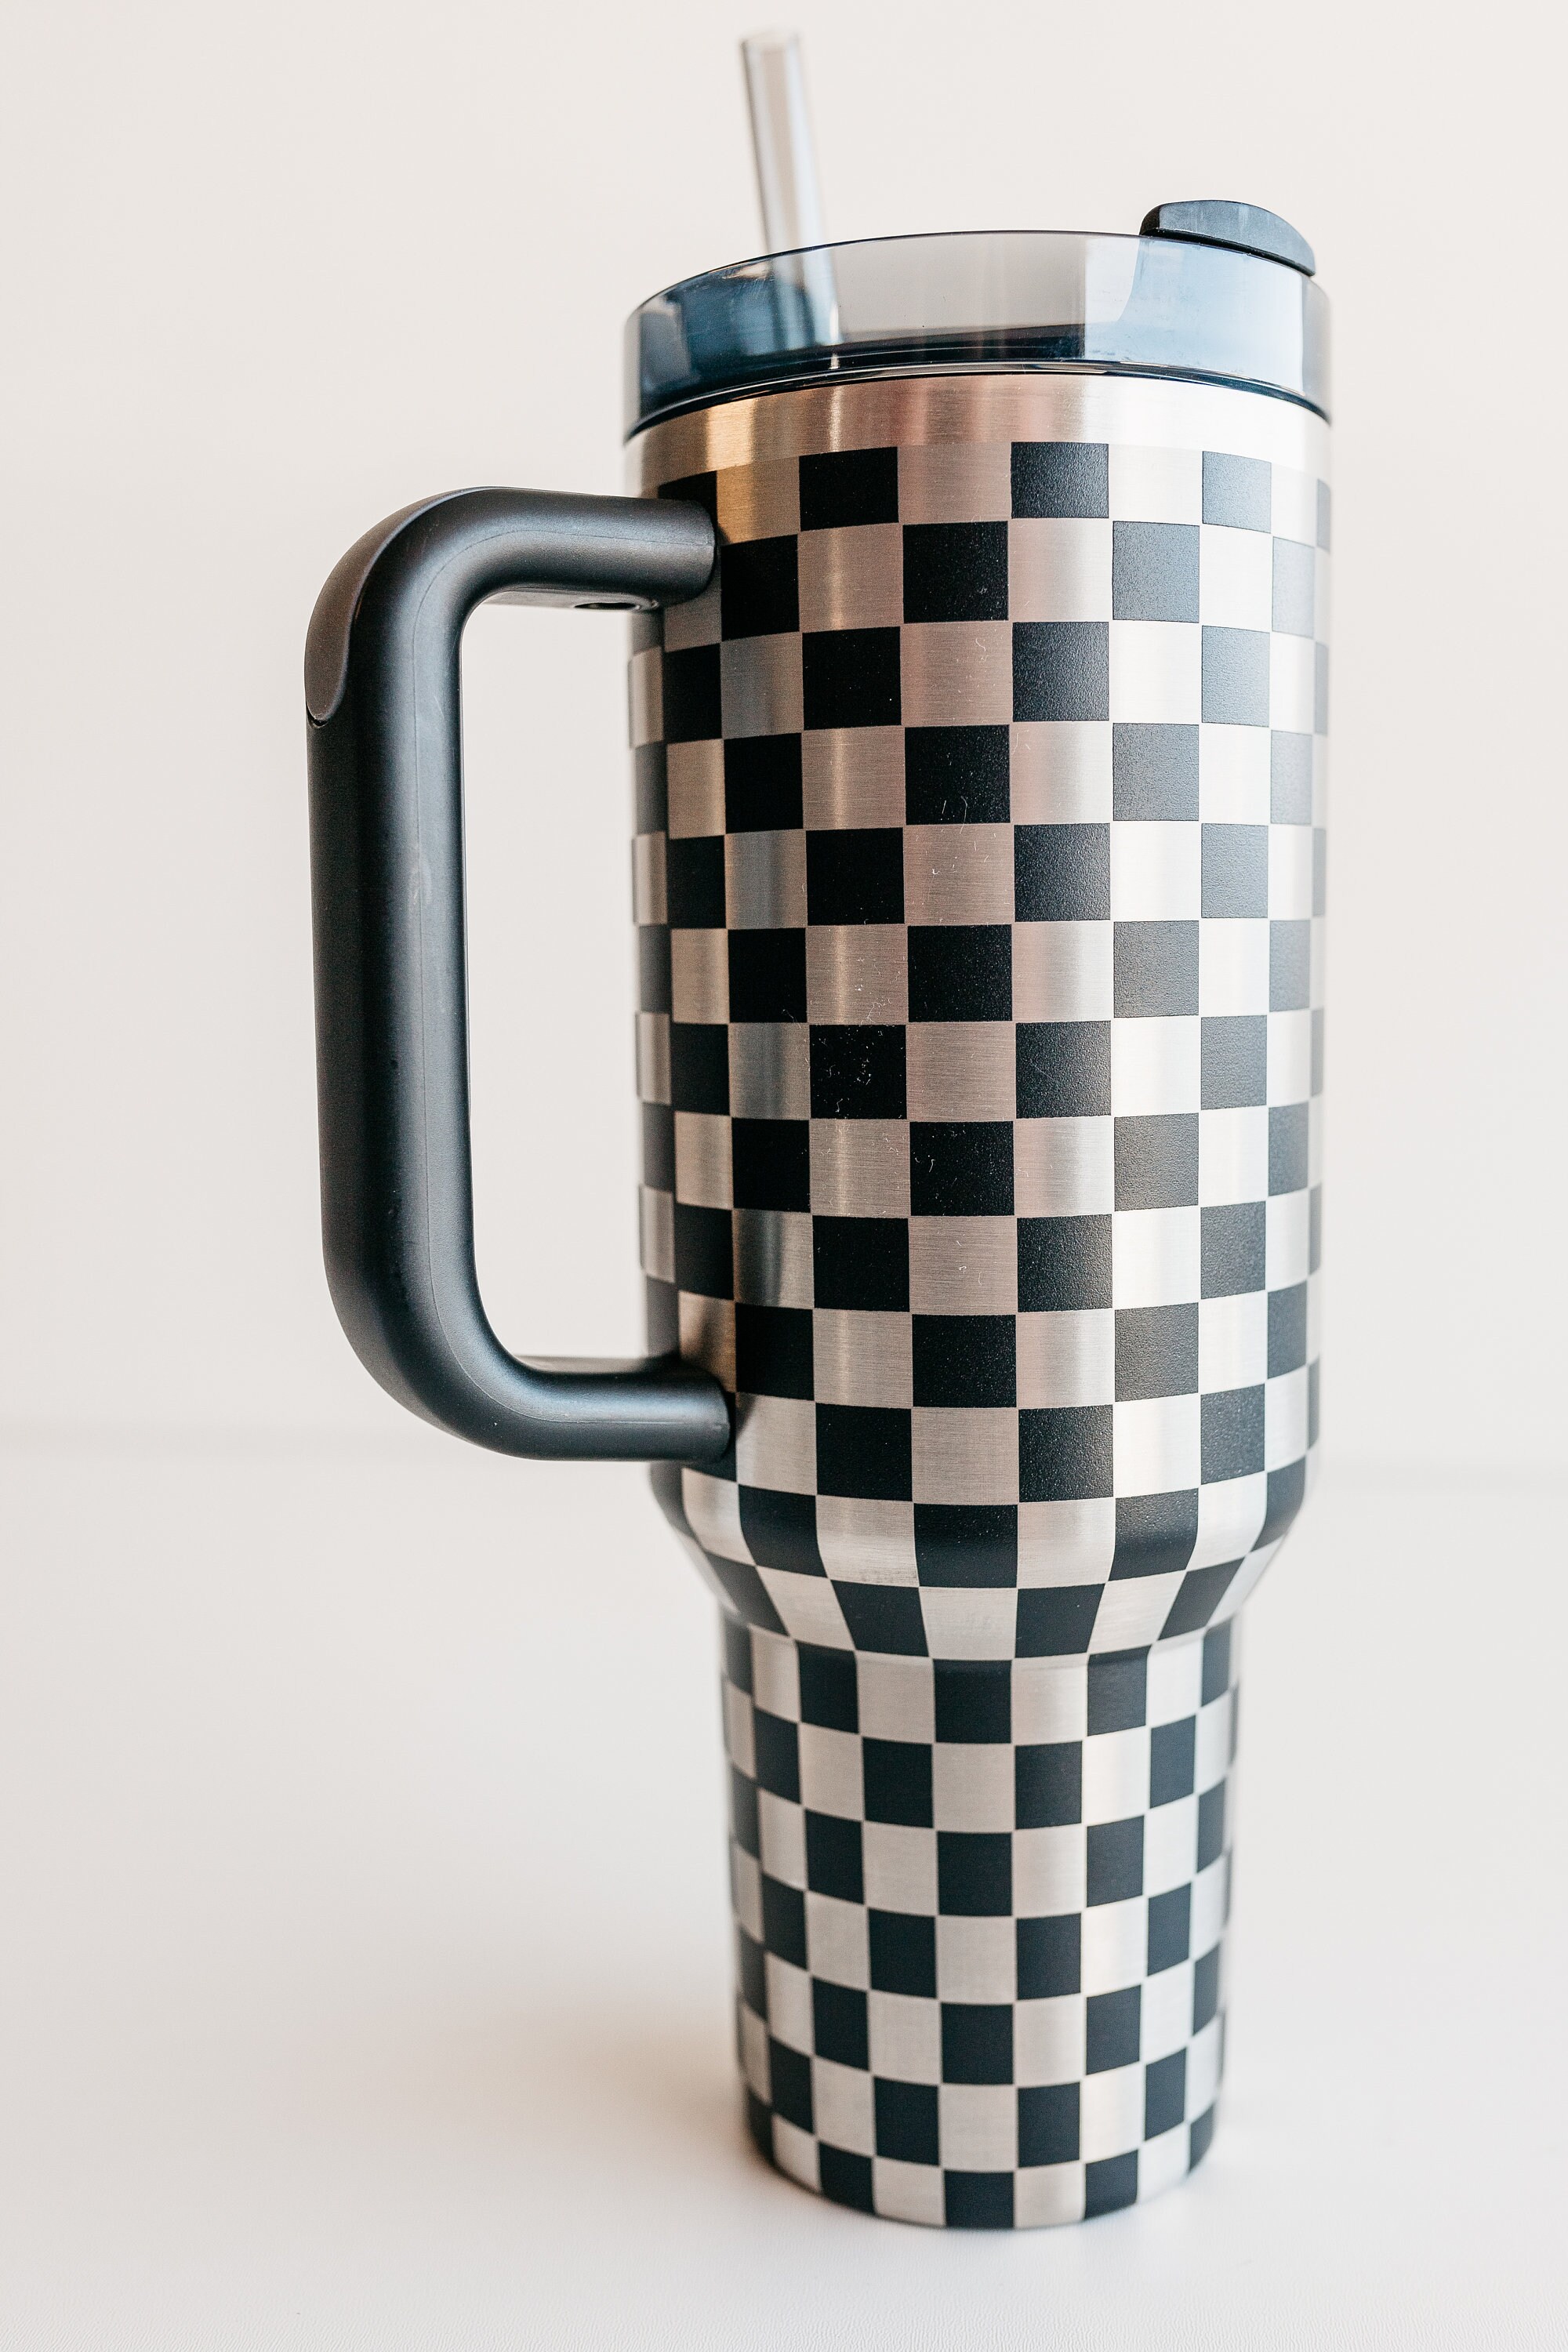 Stanley 40oz Tumbler Custom Engraved With Checkered Design 